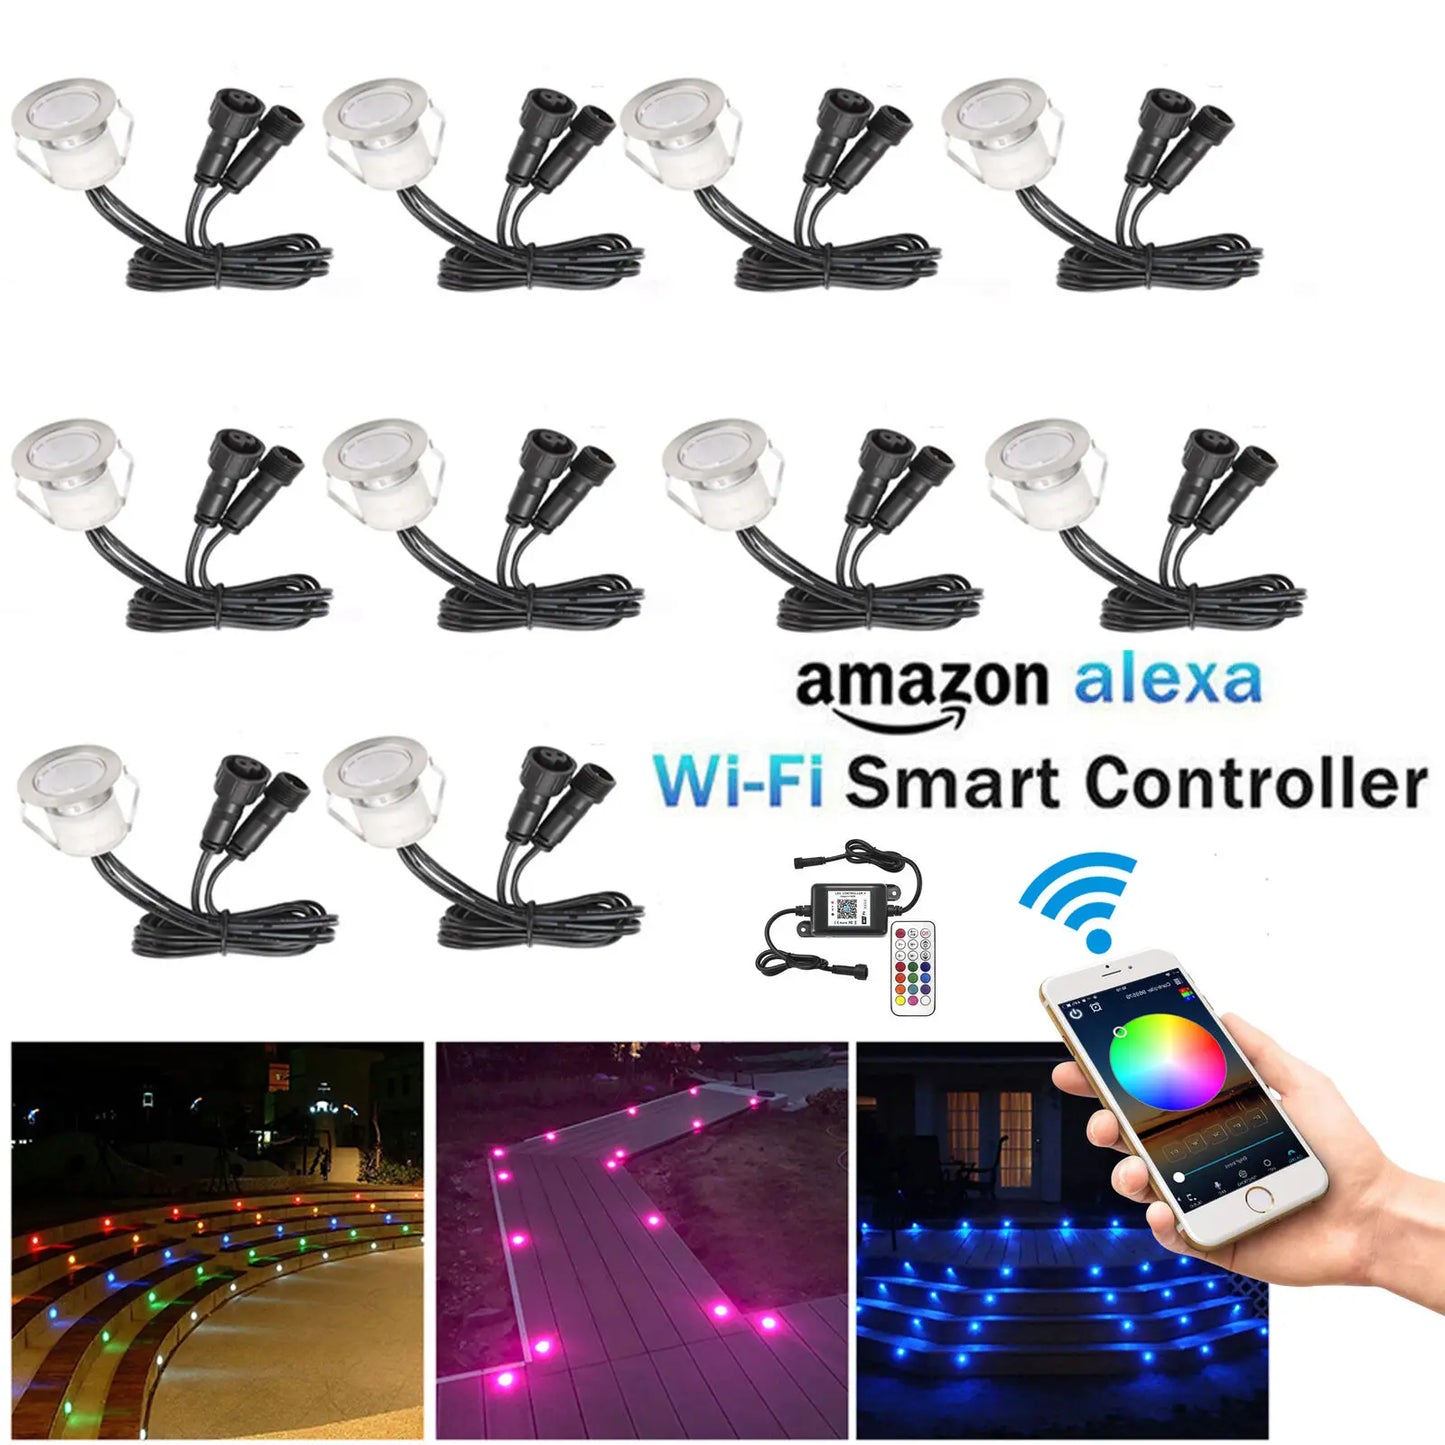 10PCS FVTLED Outdoor Led Light Waterproof Garden Terrace Deck Stair Step LED RGB/RGBW Lights Wifi/Bluetooth/IR Remote Control Lamps